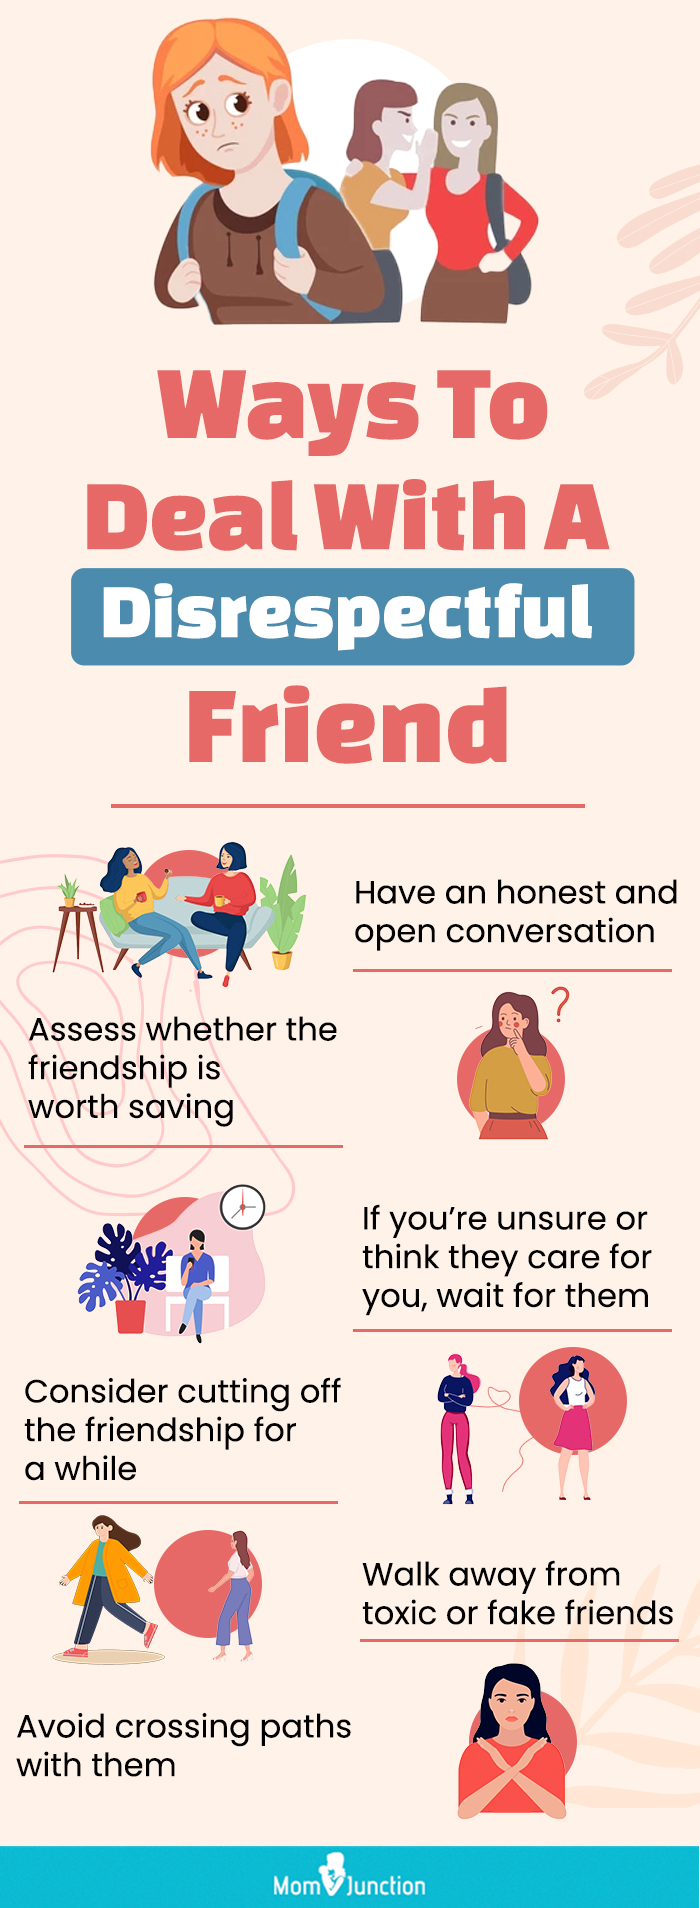 ways to deal with a disrespectful friend(infographic)